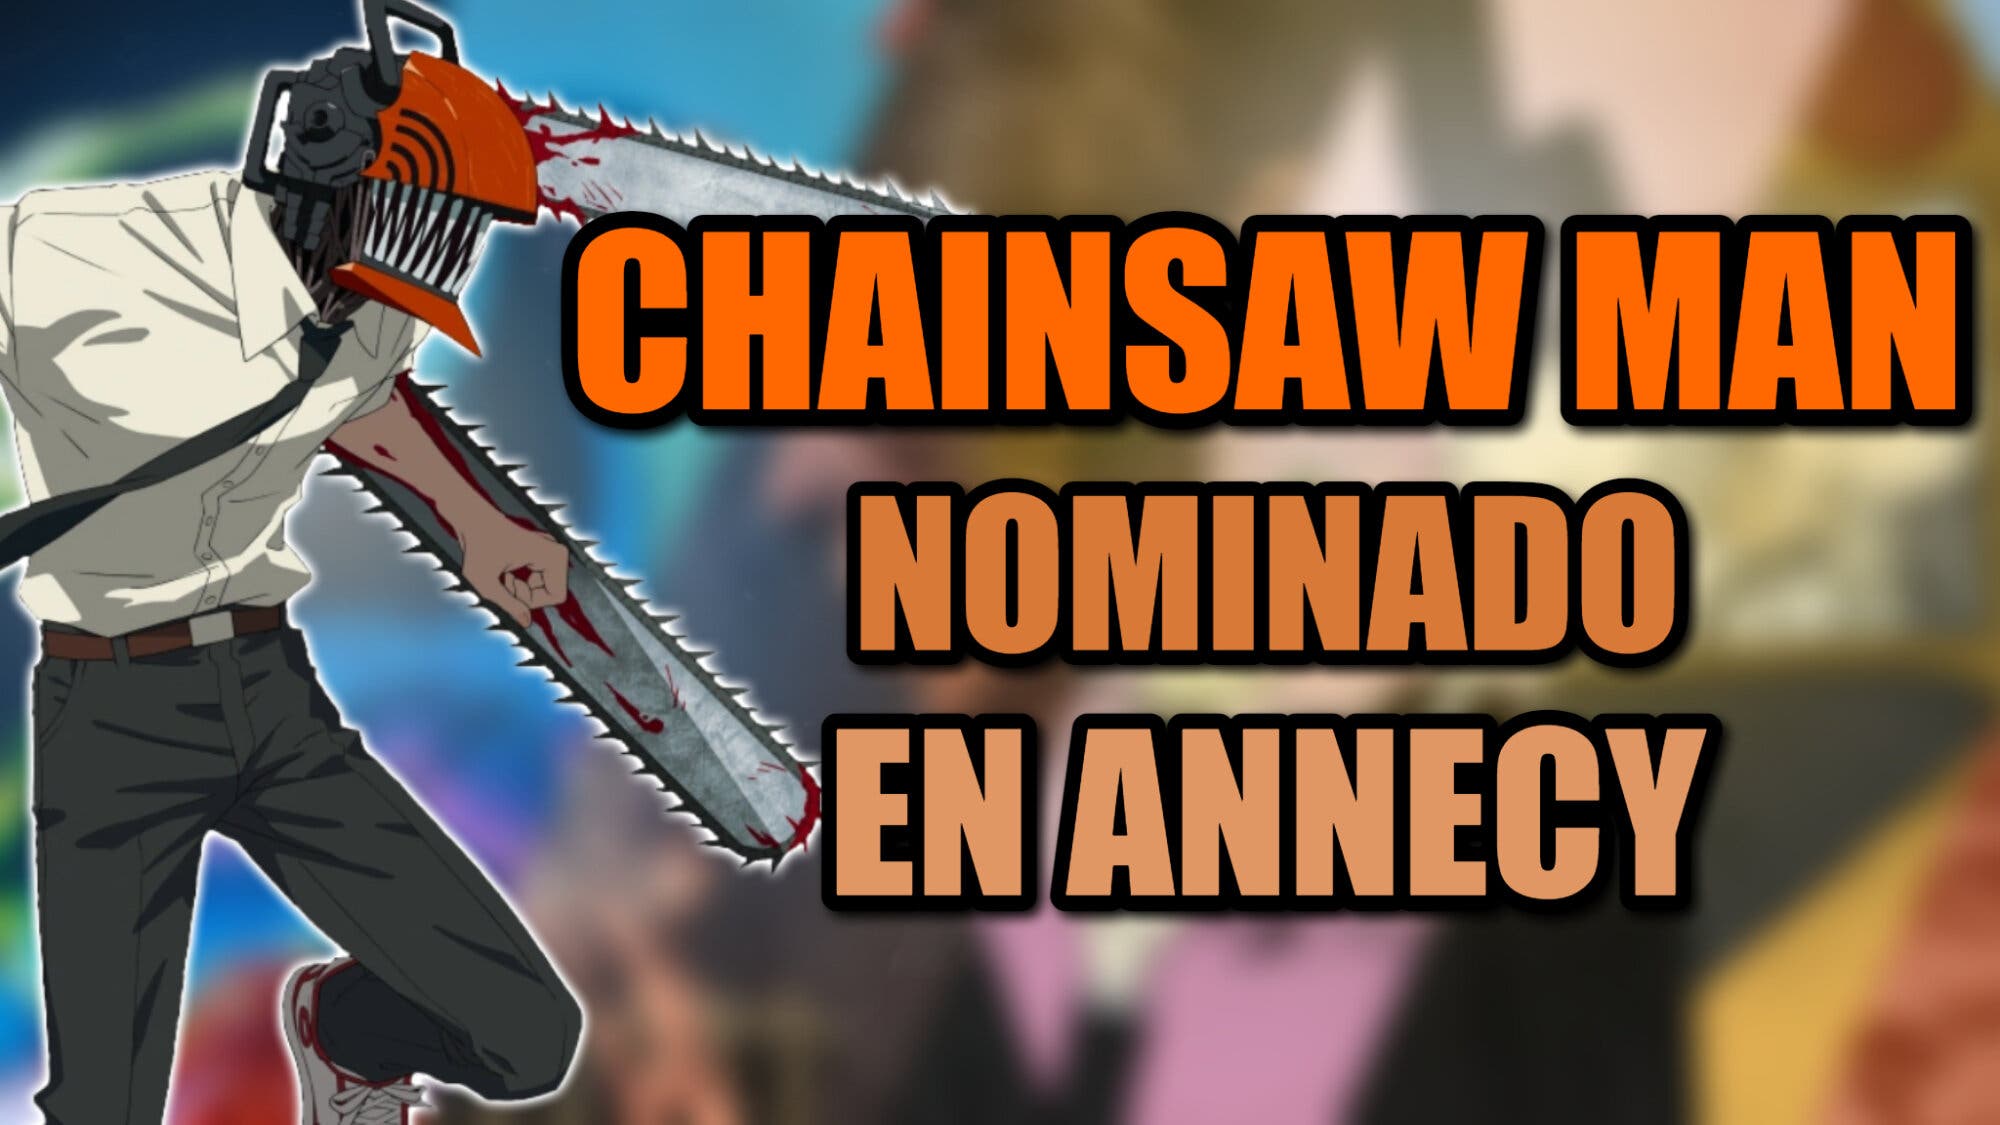 Chainsaw Man will compete for the prize for the best animated television series at the Annecy festival